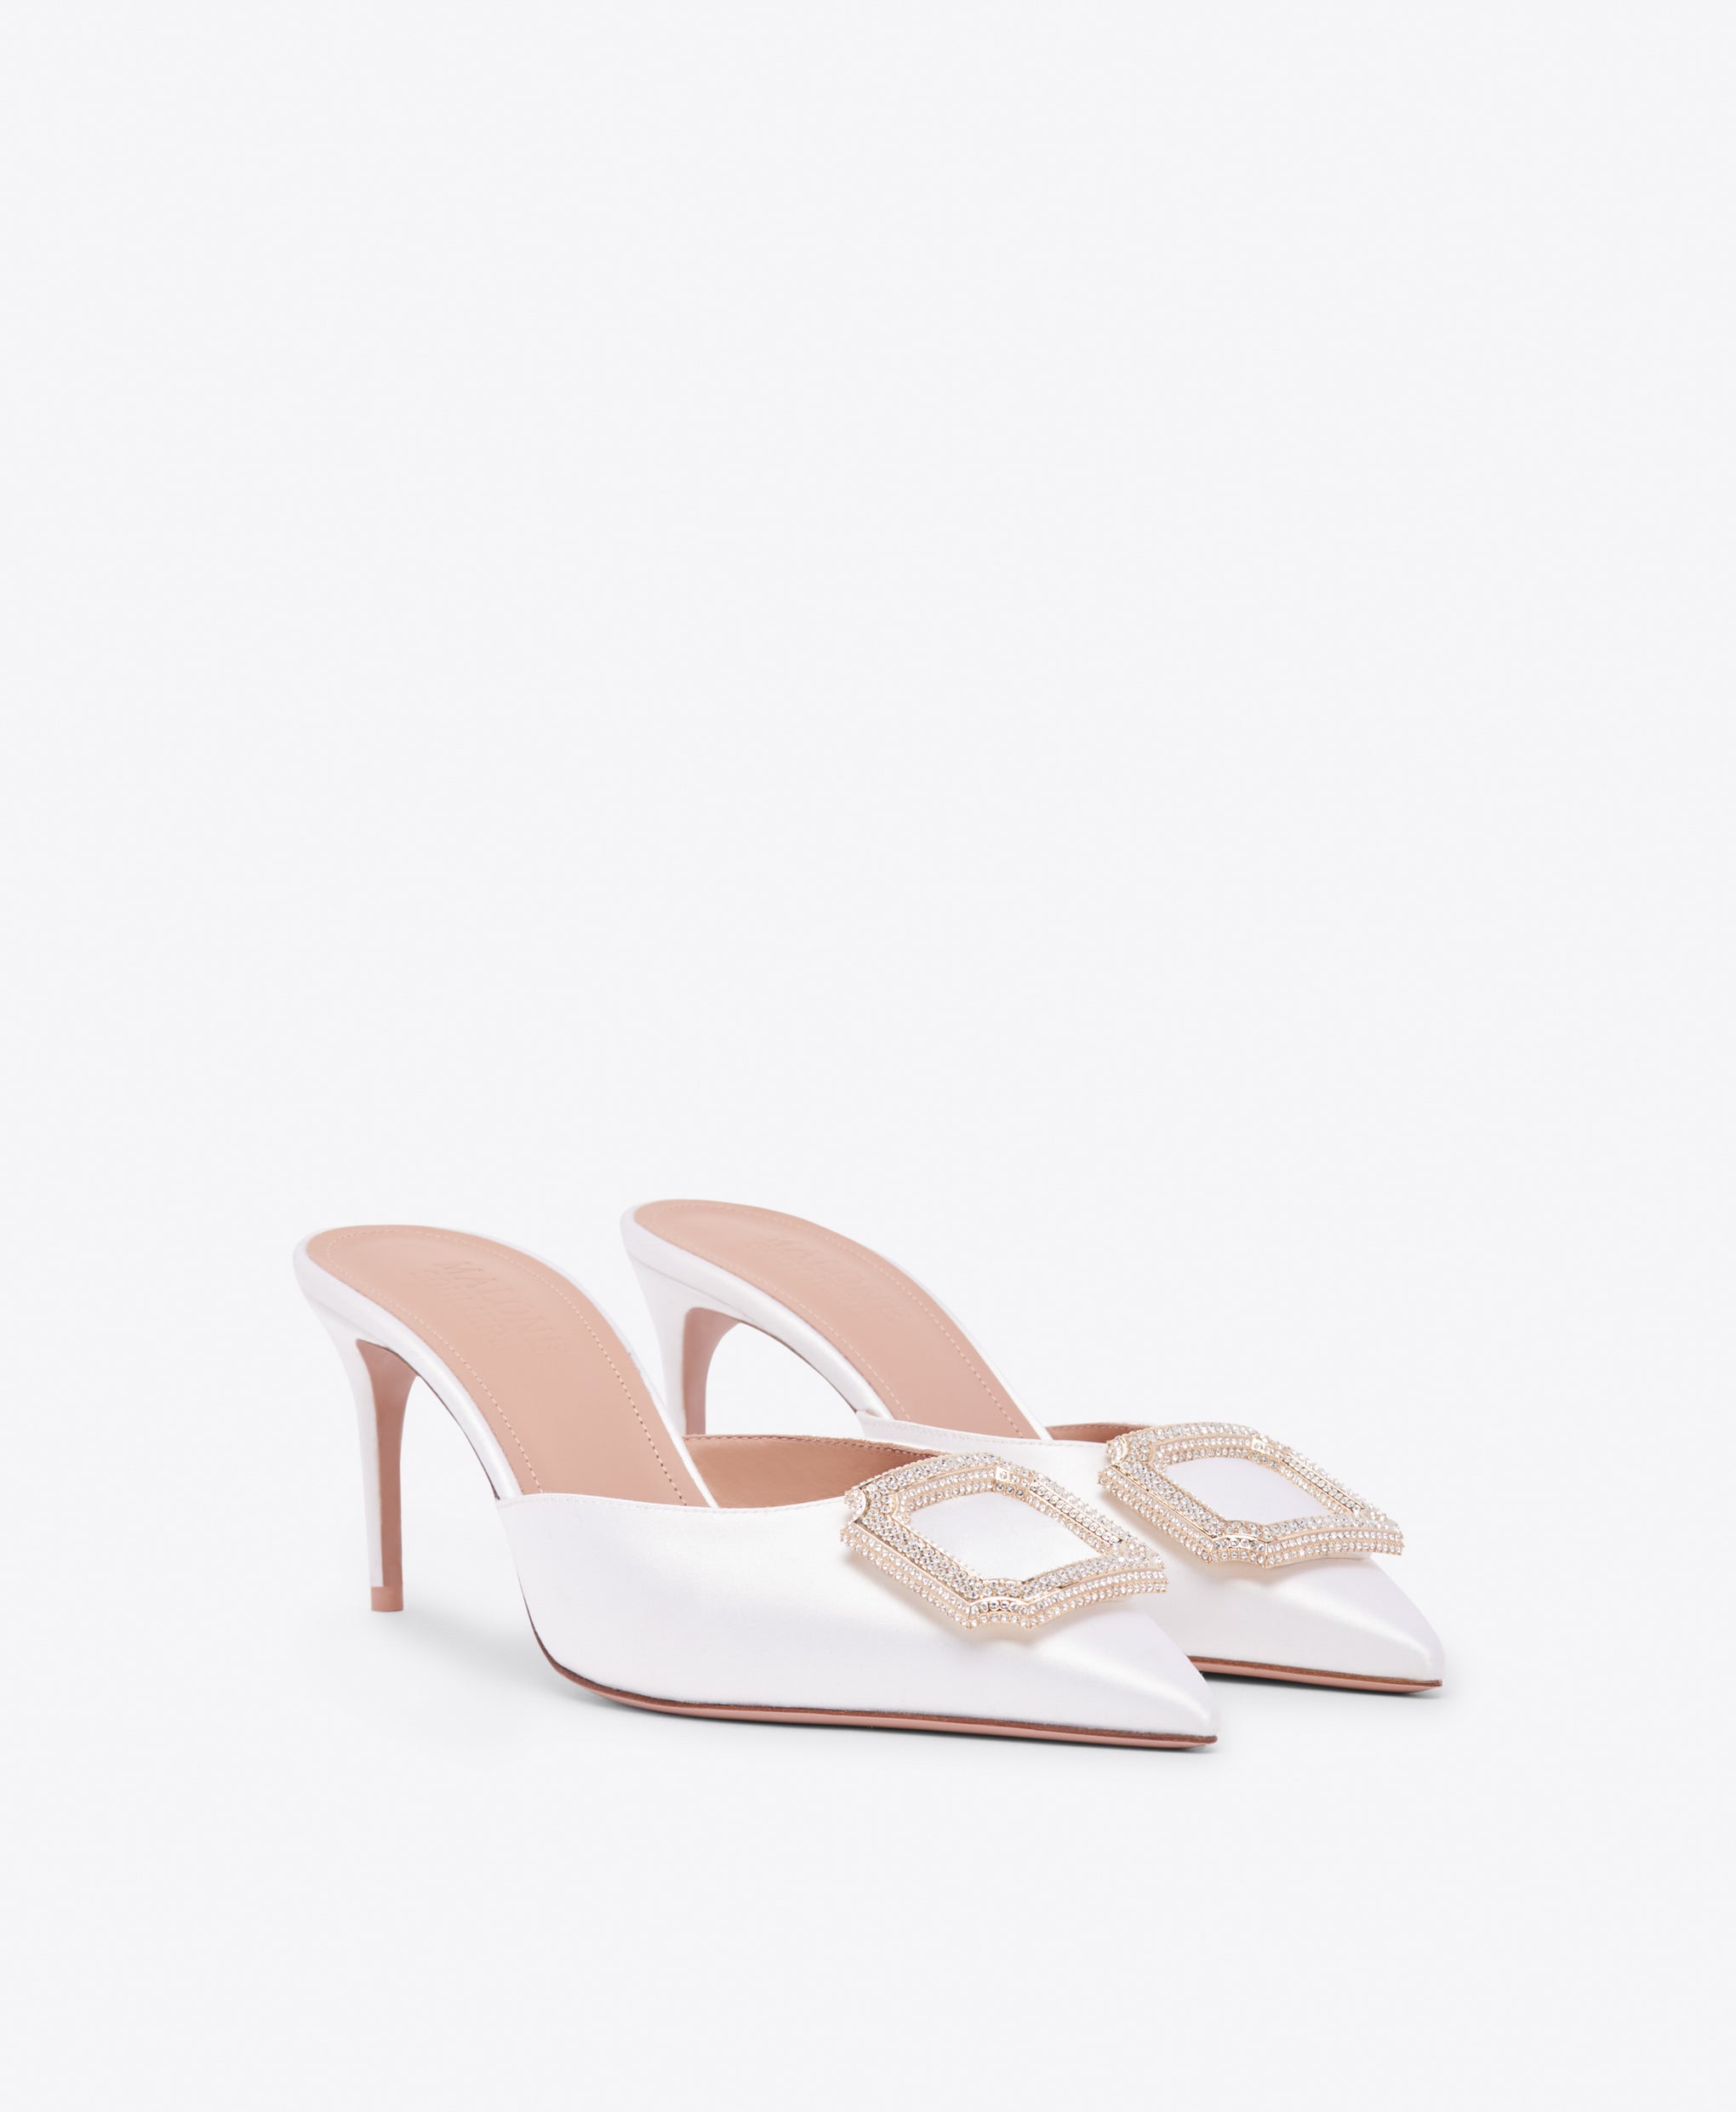 Mona 70 White Satin Mules with Crest Buckle Malone Souliers